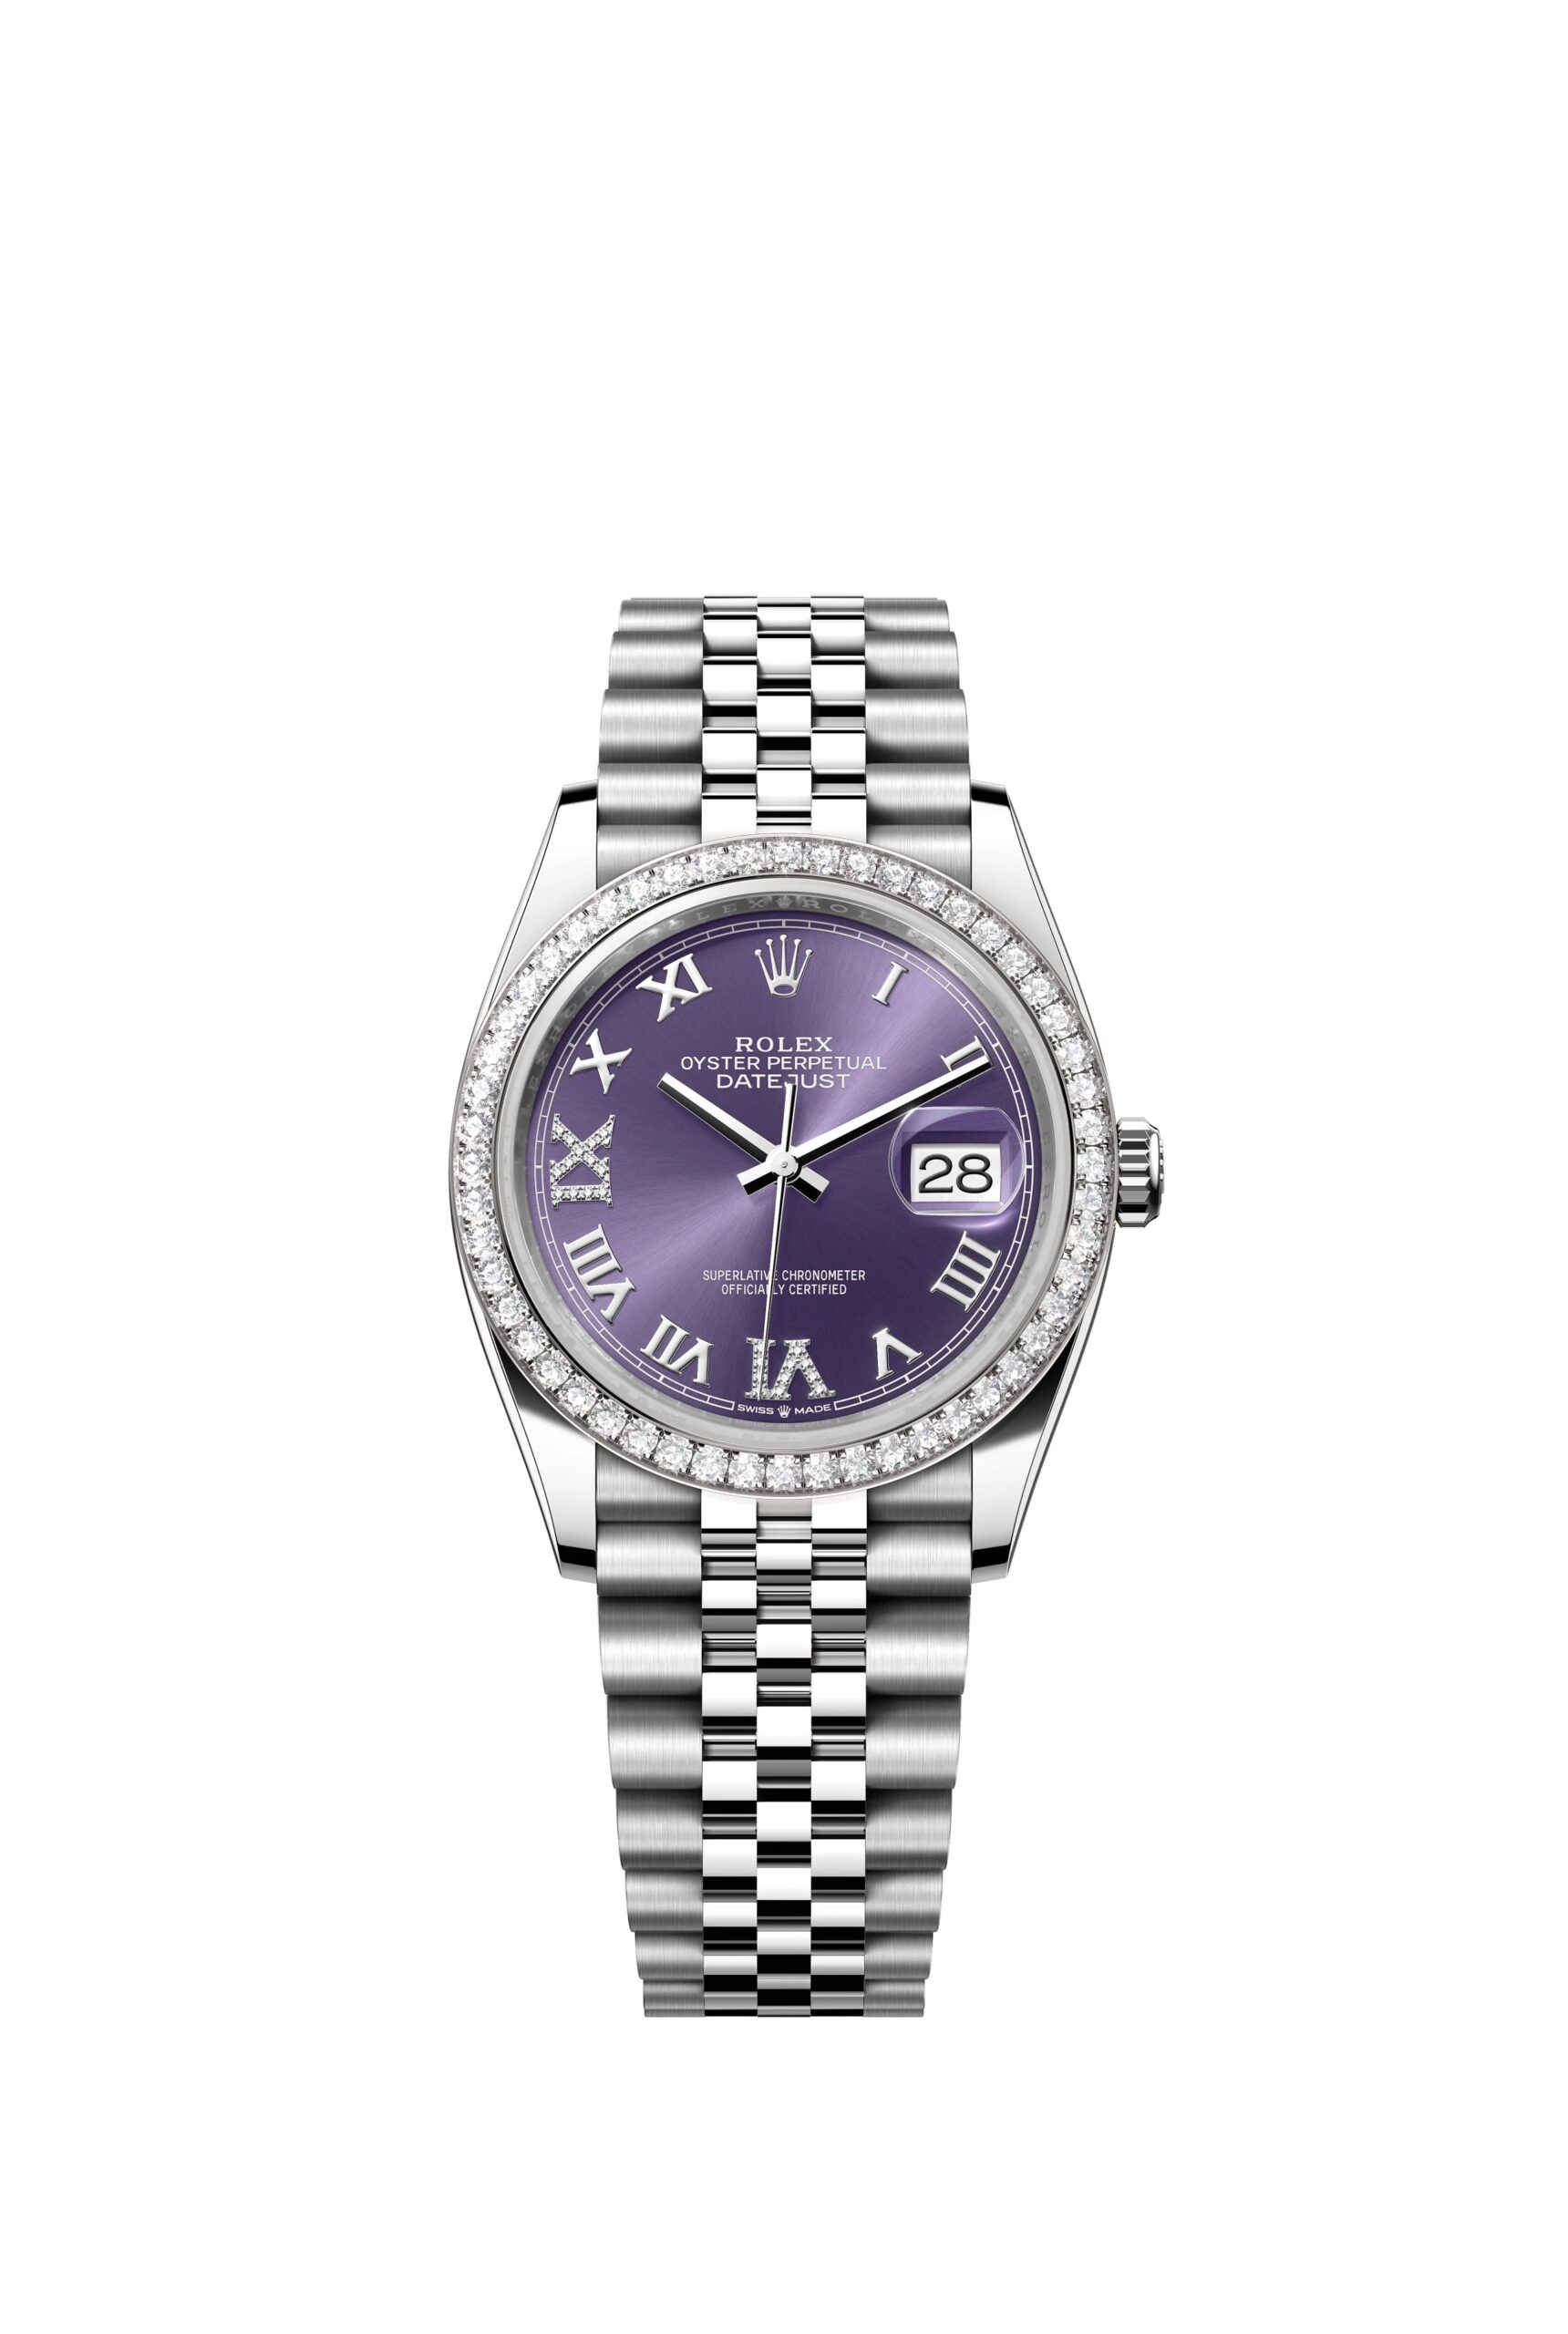 Rolex Datejust 36 Oyster, 36 mm, Oystersteel, white gold and diamonds Reference 126284RBR